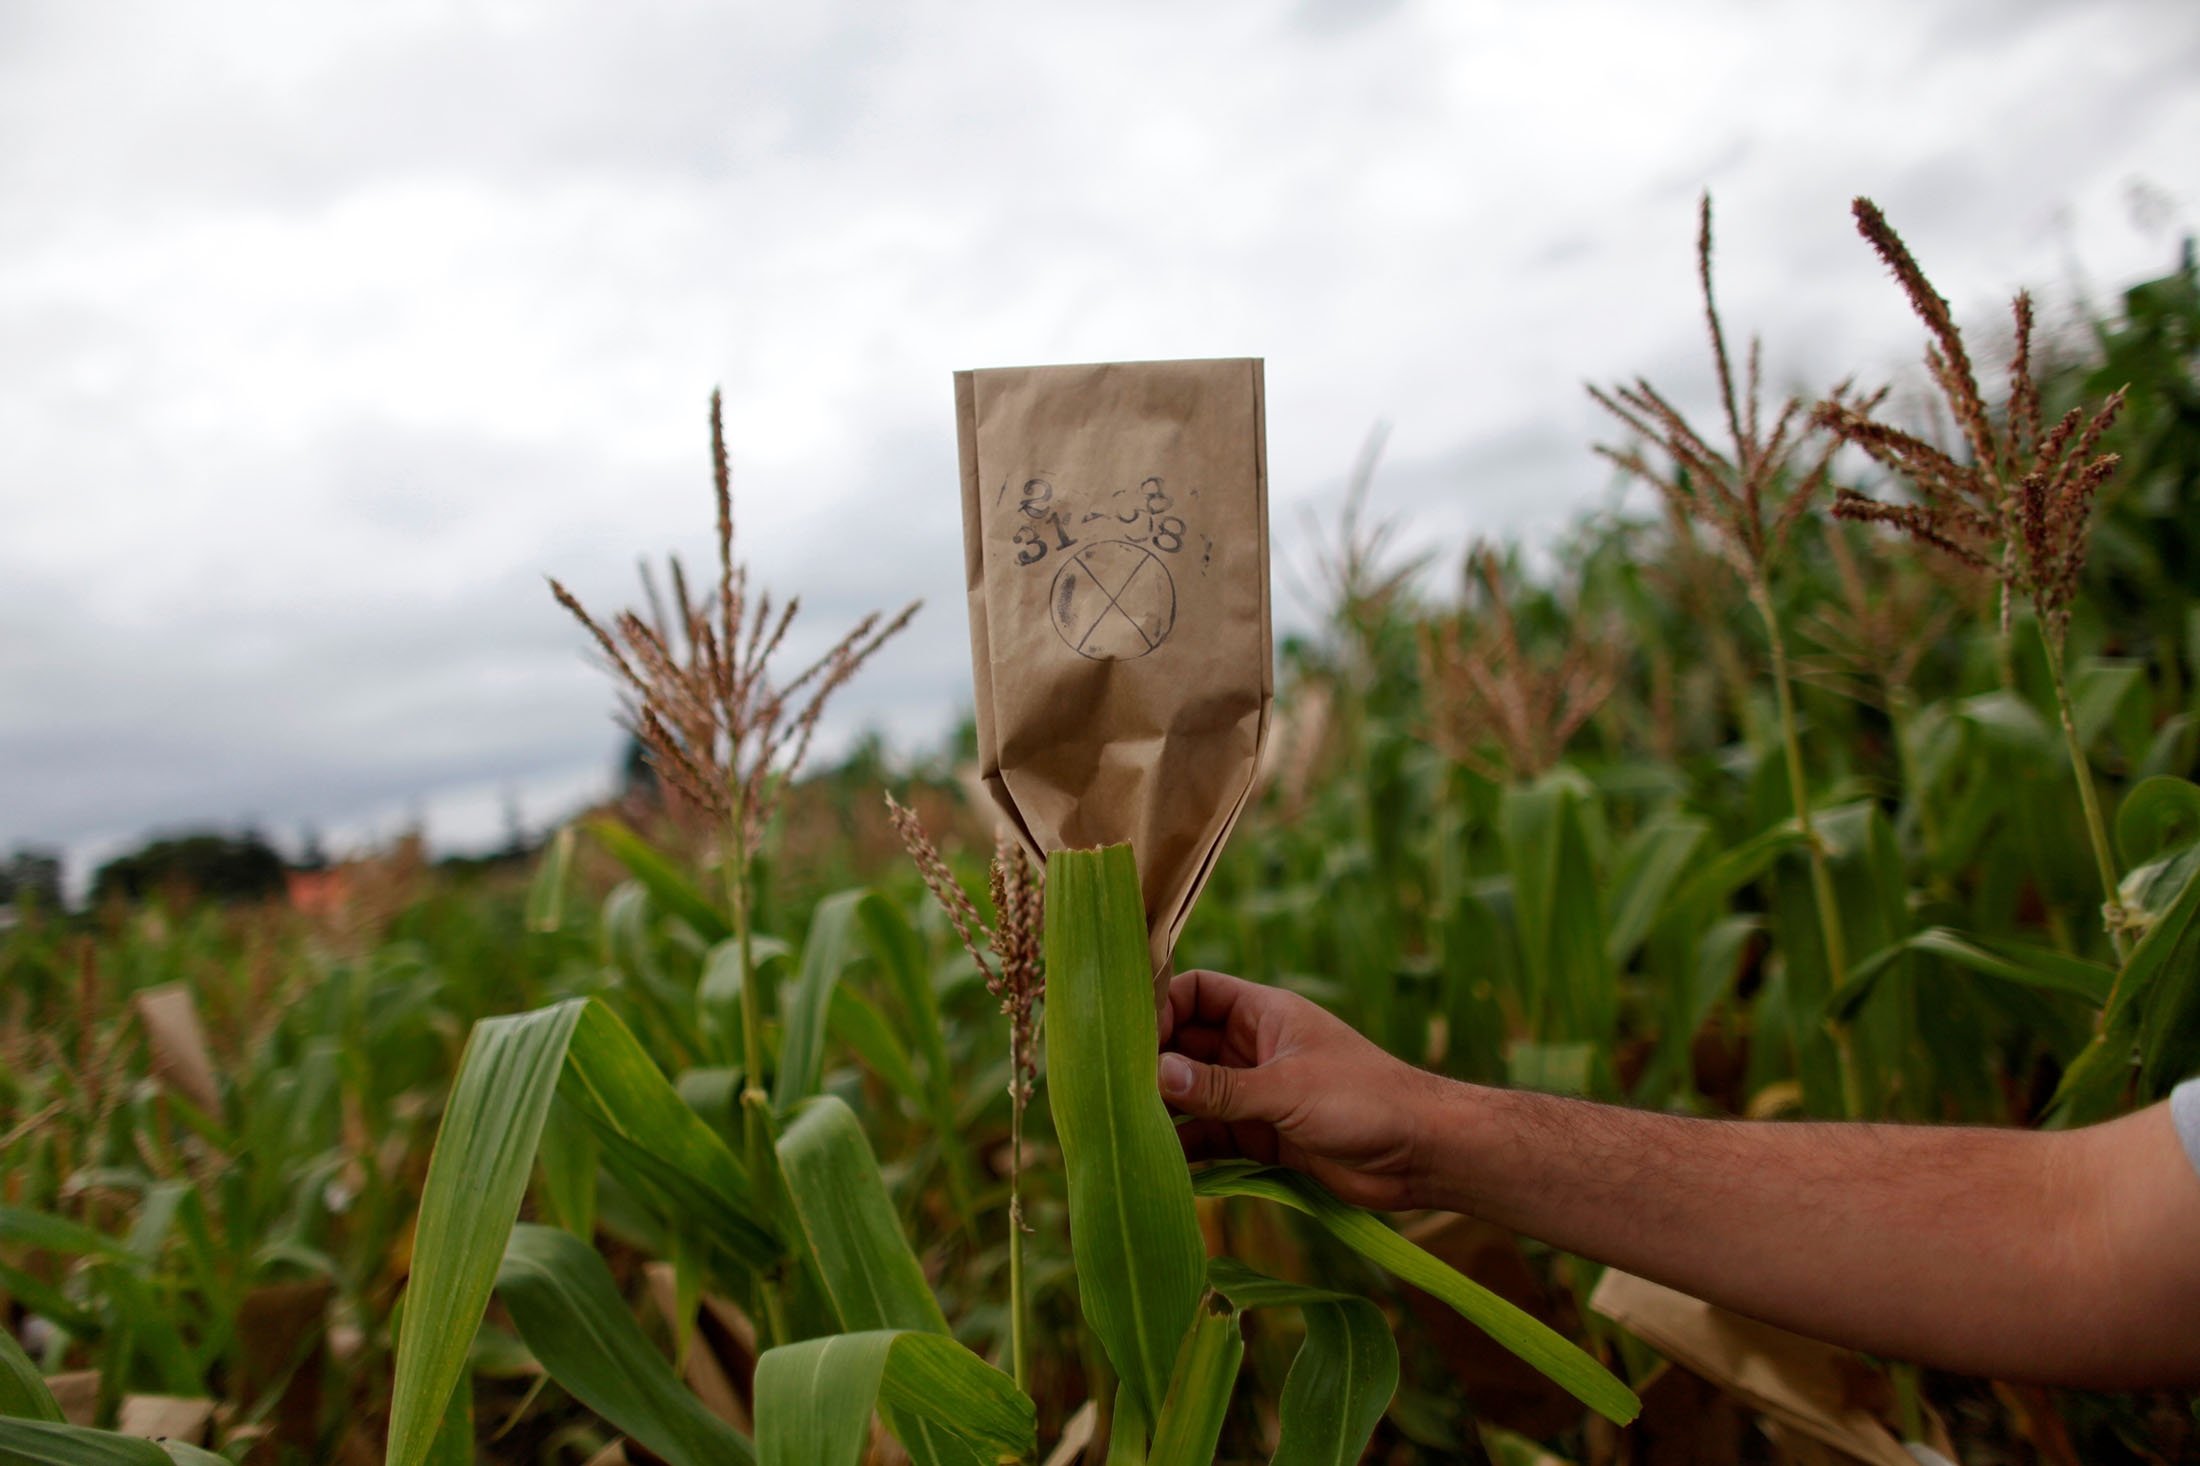 A scientist puts up a marker in a maize field at the International Maize and Wheat Improvement Center (CIMMYT) in El Batan on the outskirts of Mexico City, Mexico, Aug. 31, 2010. (REUTERS Photo)